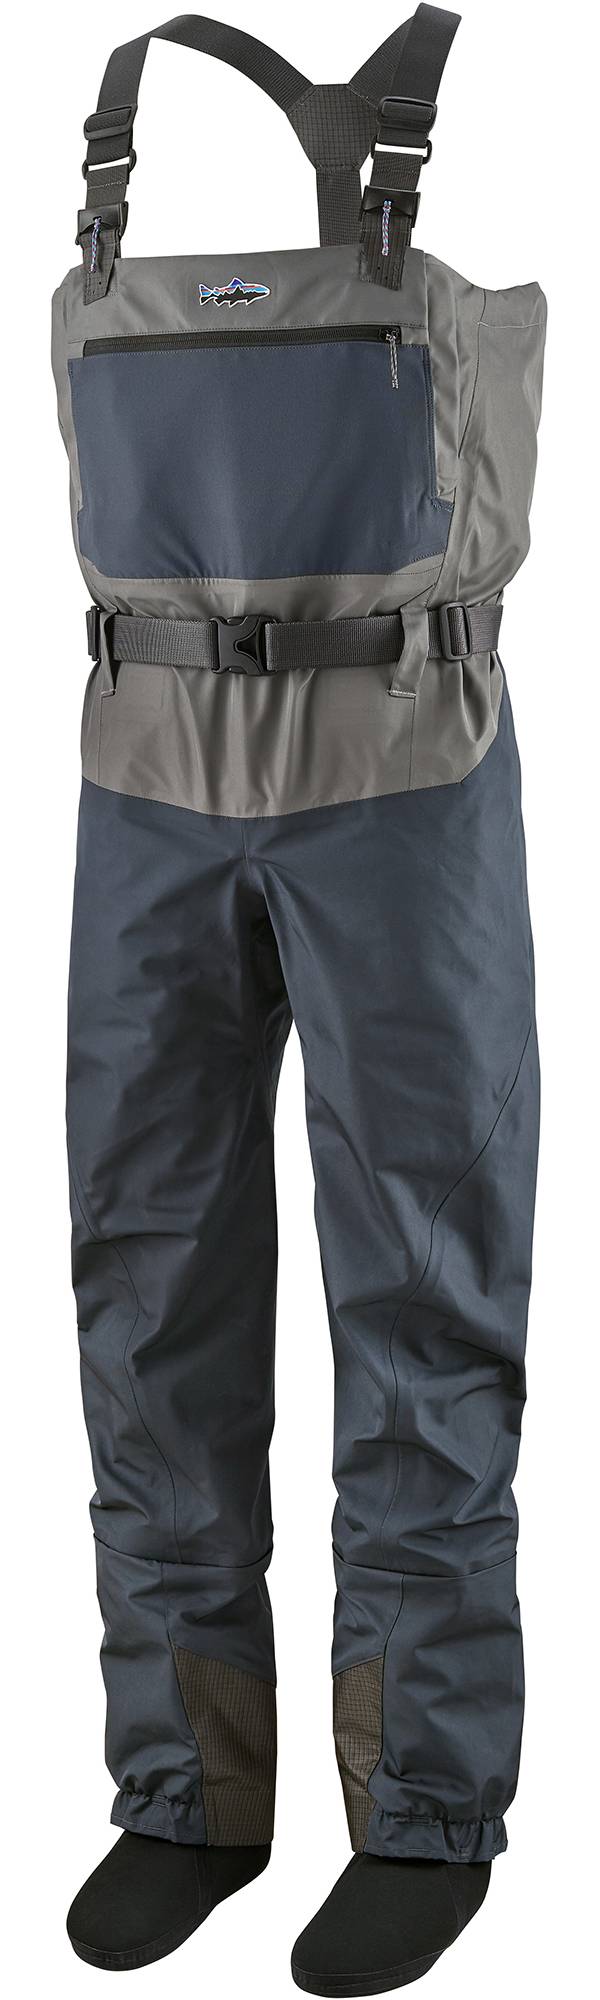 Patagonia Men's Swiftcurrent Waders product image